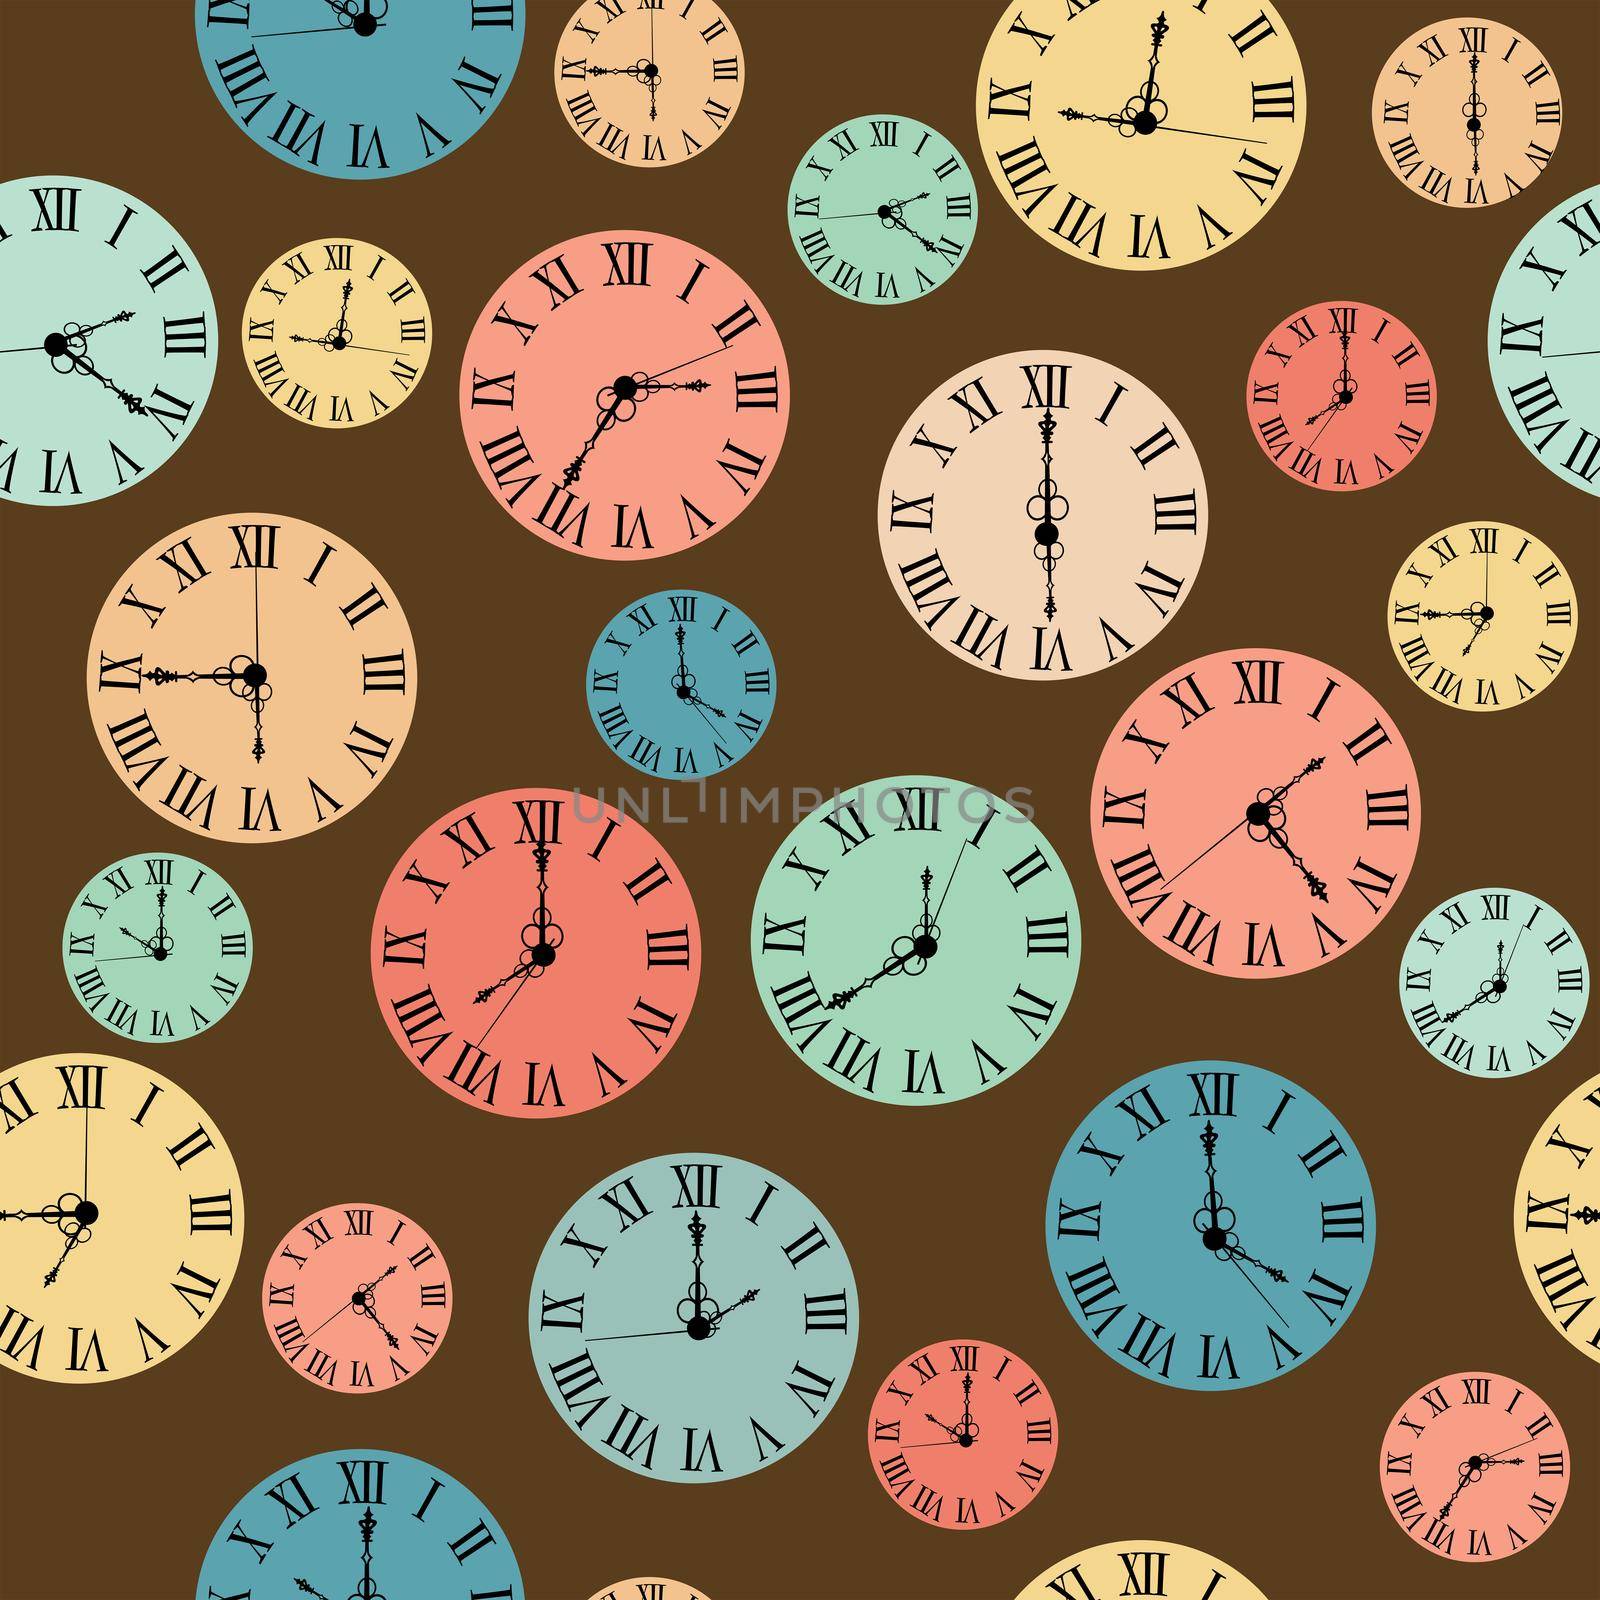 Vintage seamless with clock faces by hibrida13